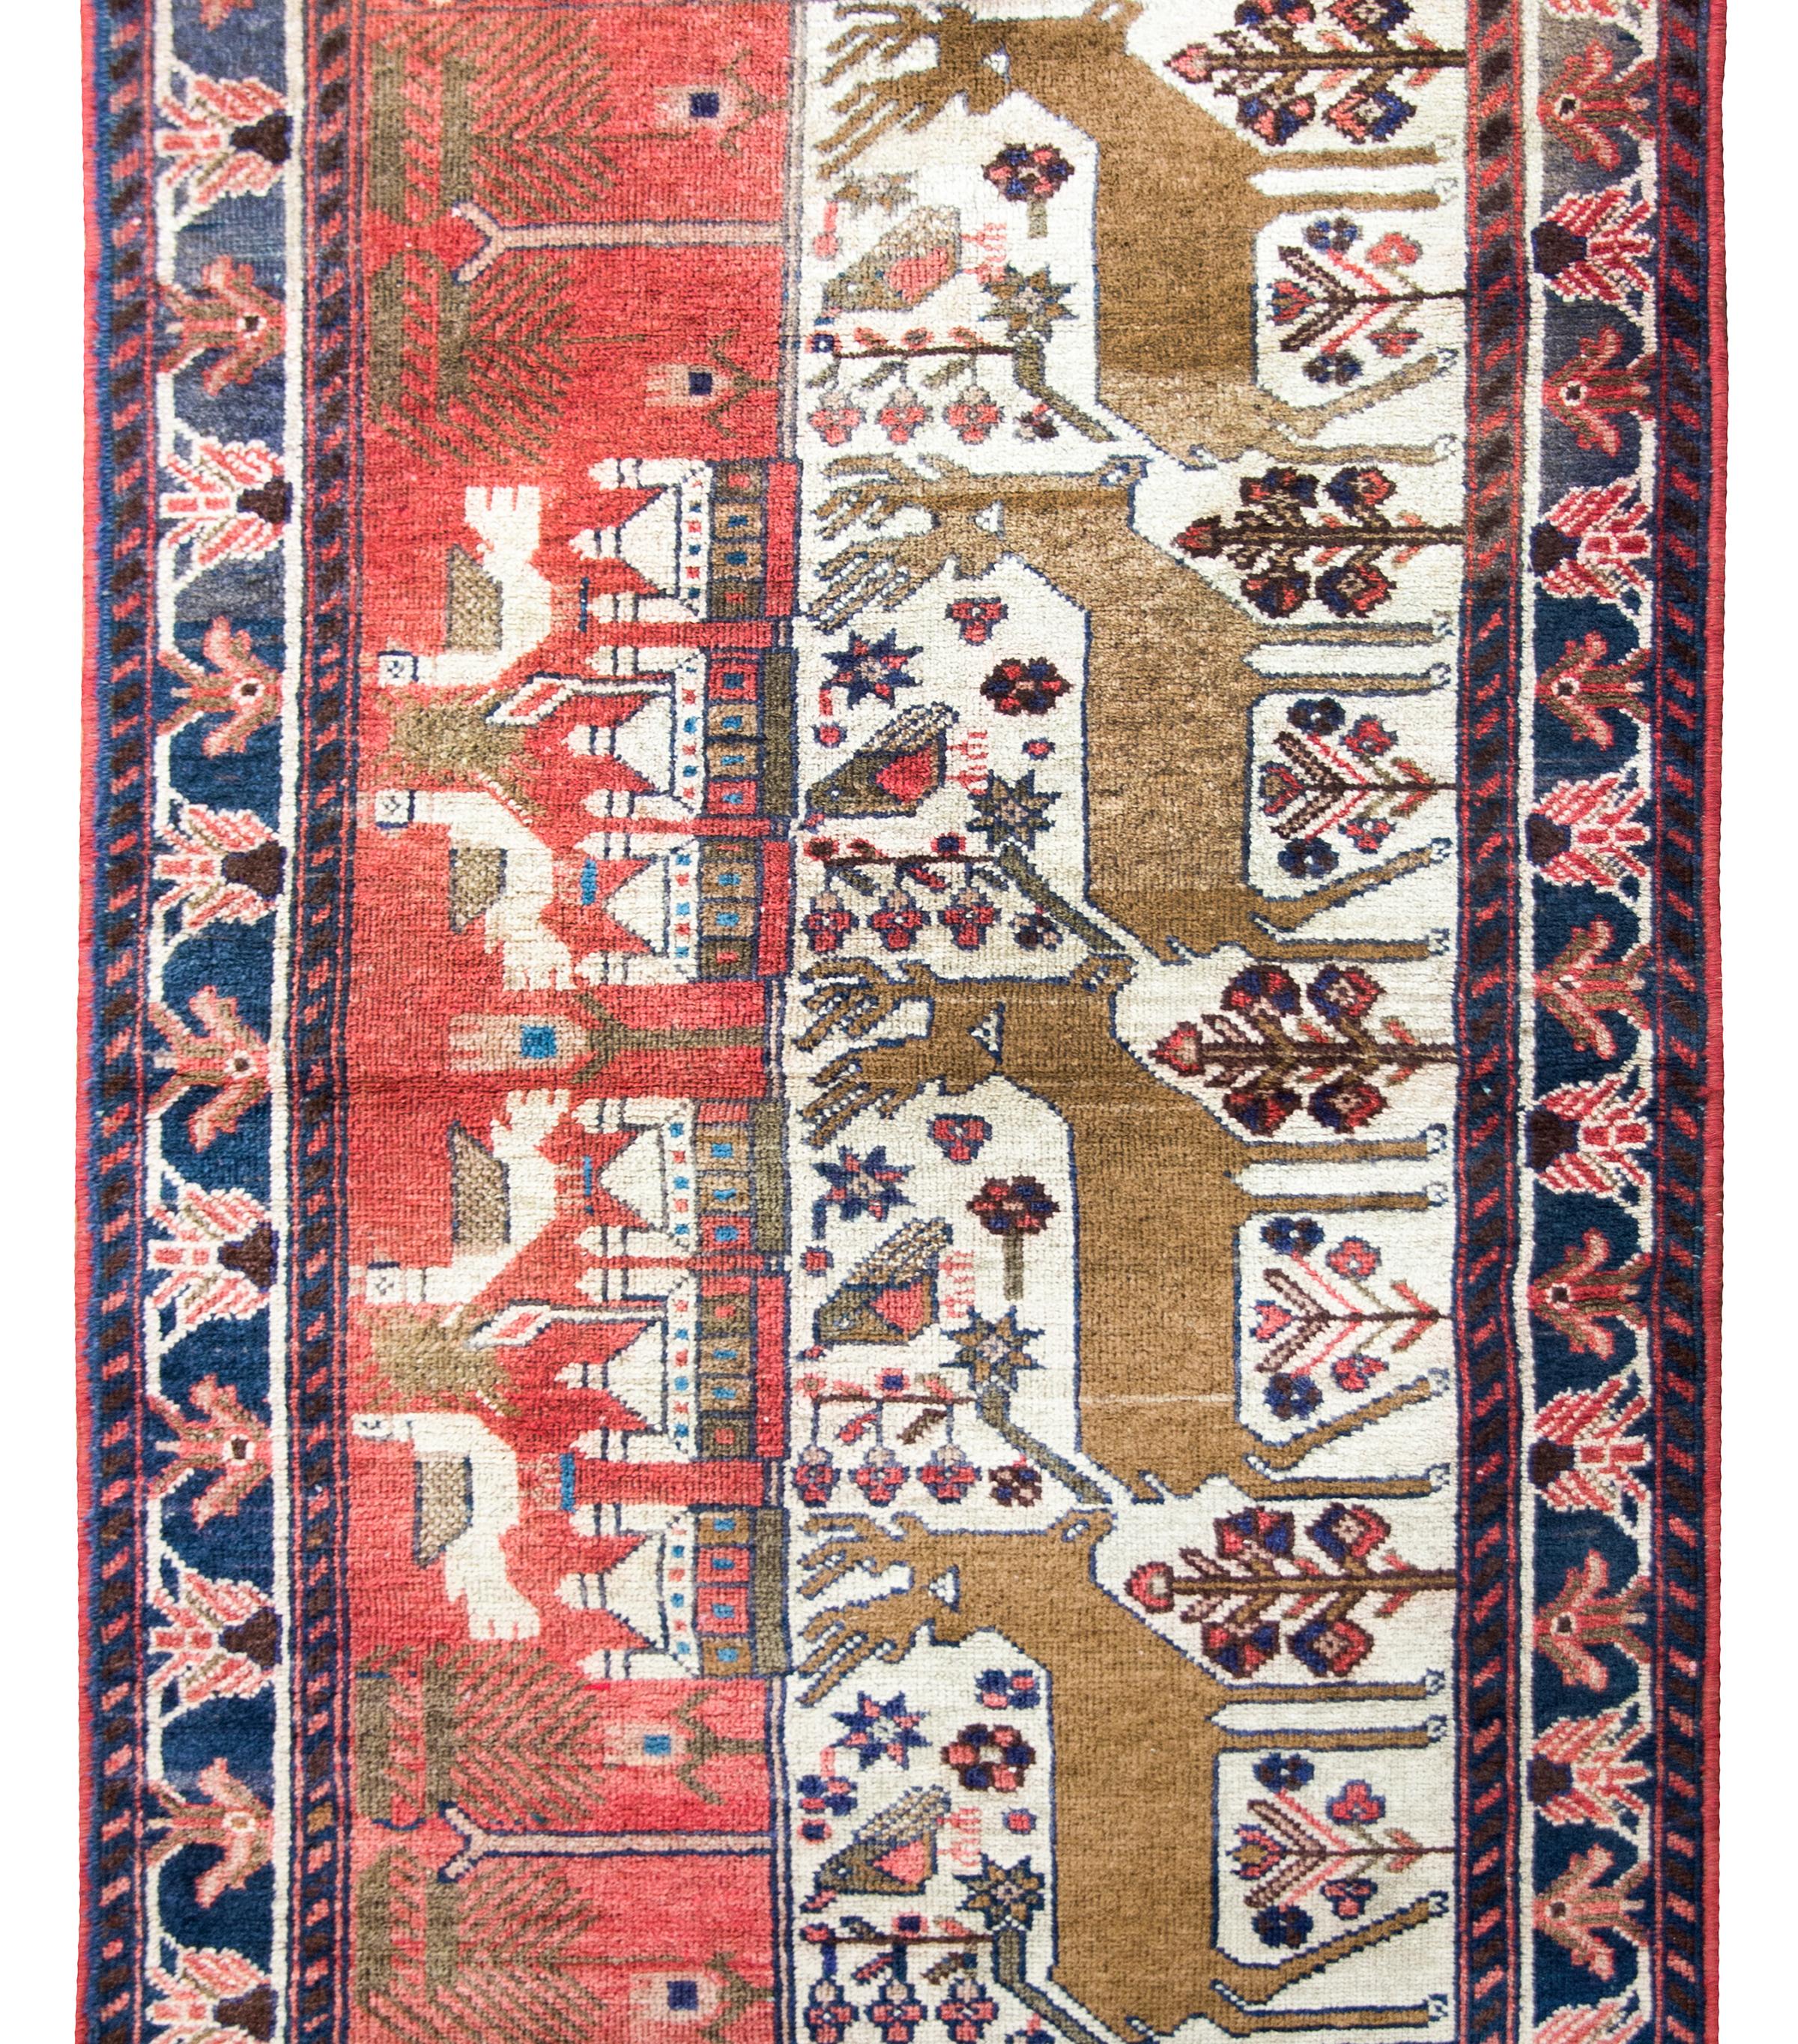 An incredible folky mid-20th century Persian Klederdasht pictorial rug depicting four large deer living amidst a field of flowers, with a village in the background, and four large doves above.  The border is simple, with a repeated floral pattern